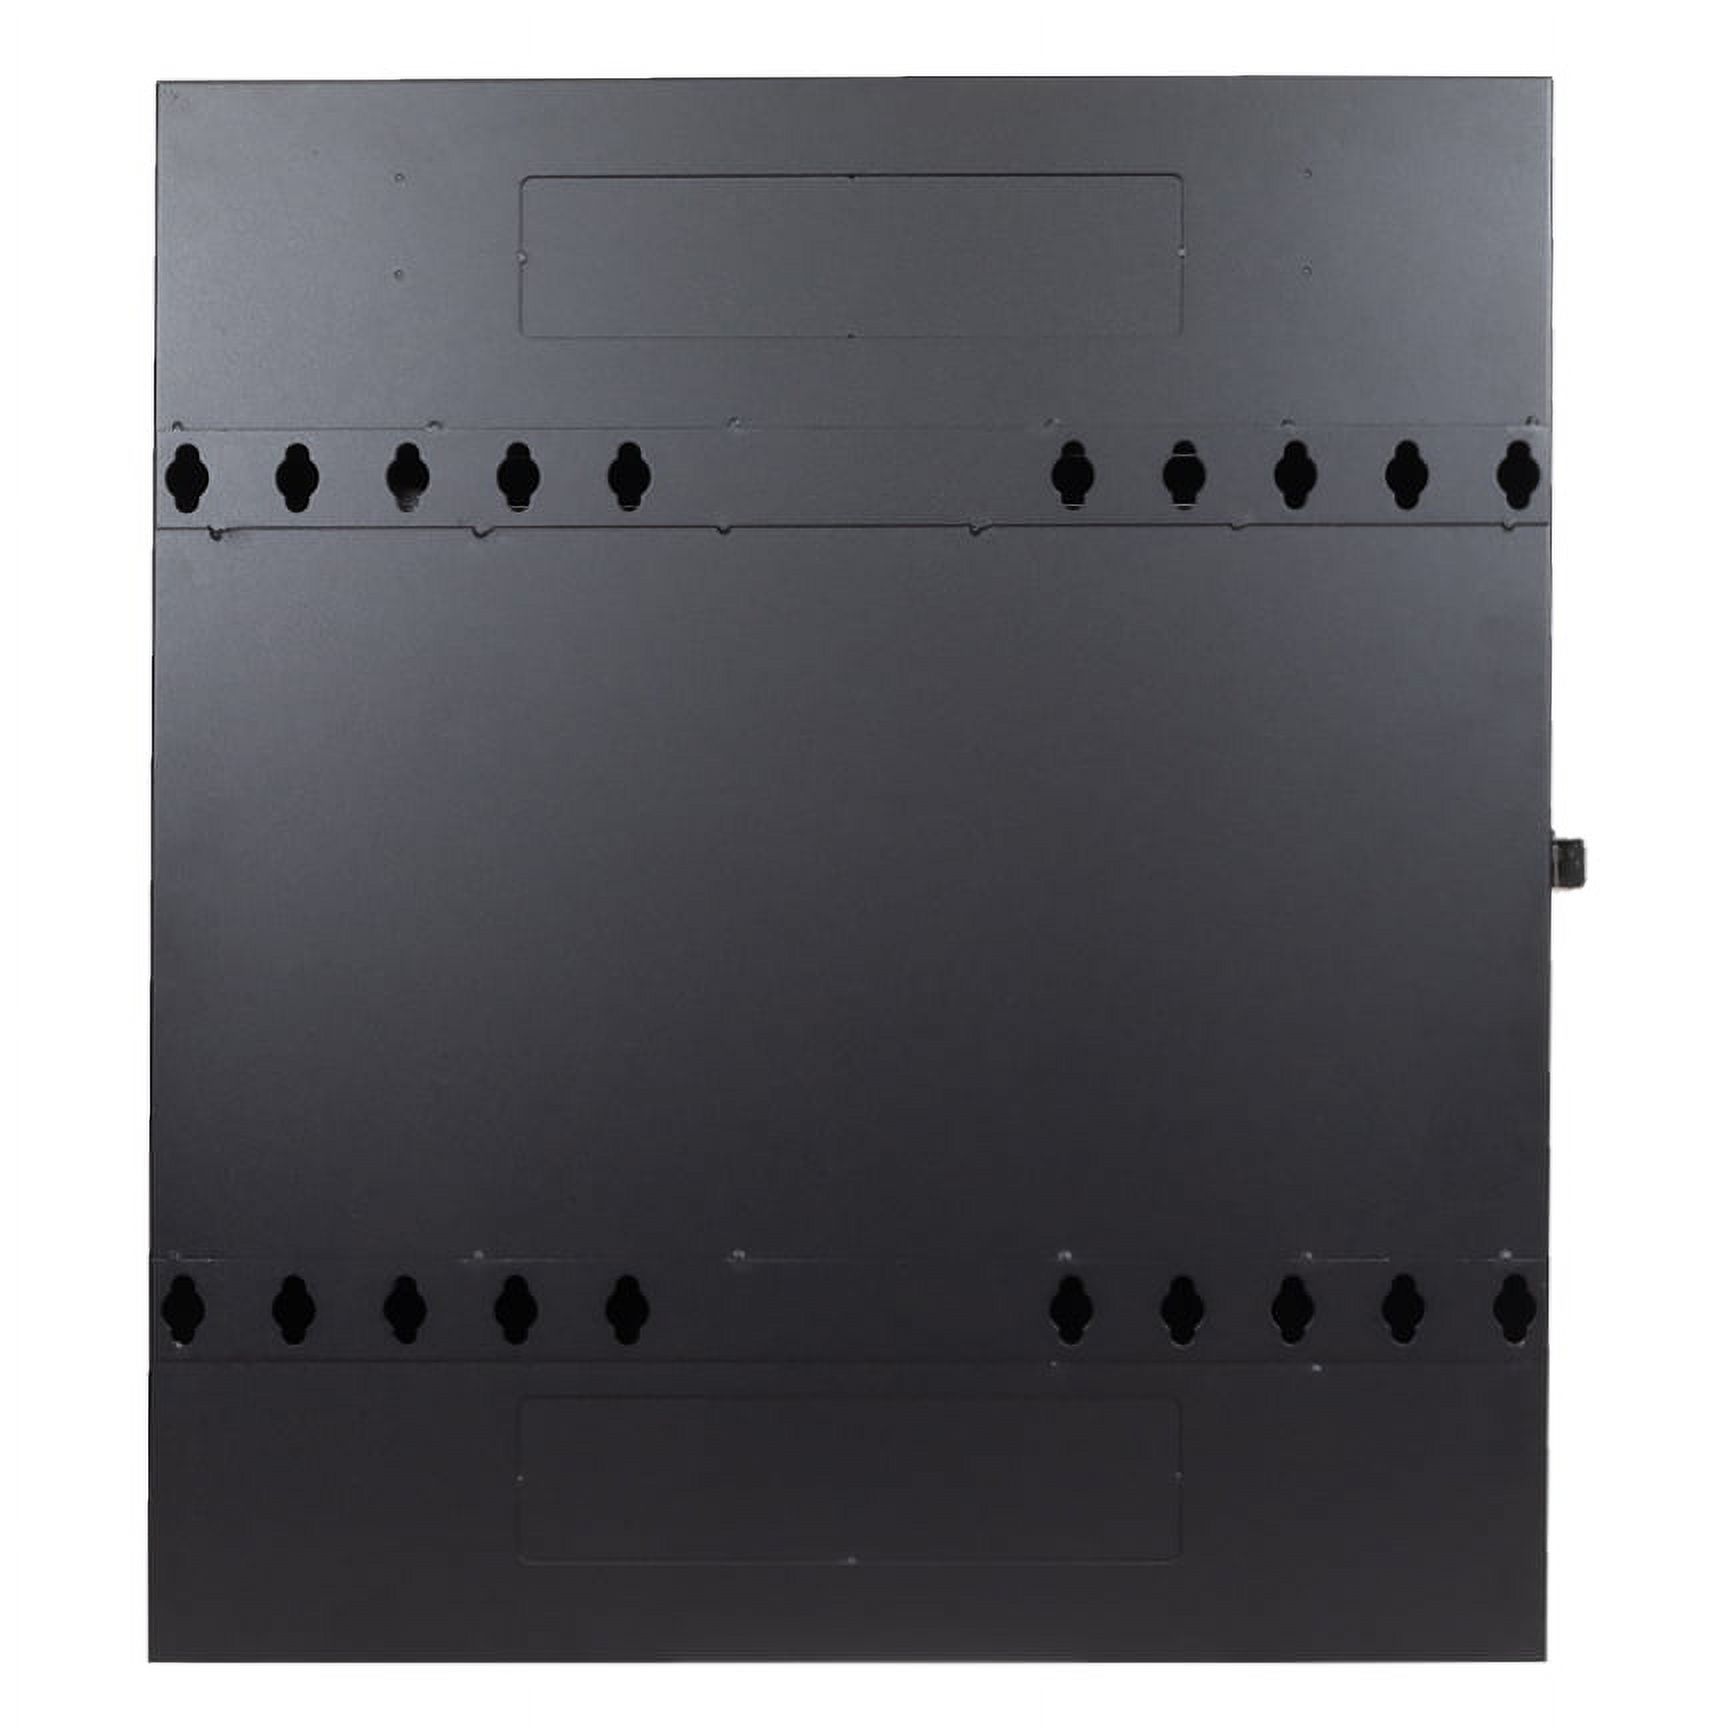 NavePoint 2U Vertical Wall Mount Enclosure for 19" Networking Equipment, Servers, Switch and Patch Panels, Low Profile, 20" Depths, Max Weight Capacity 150 Lbs - image 3 of 6